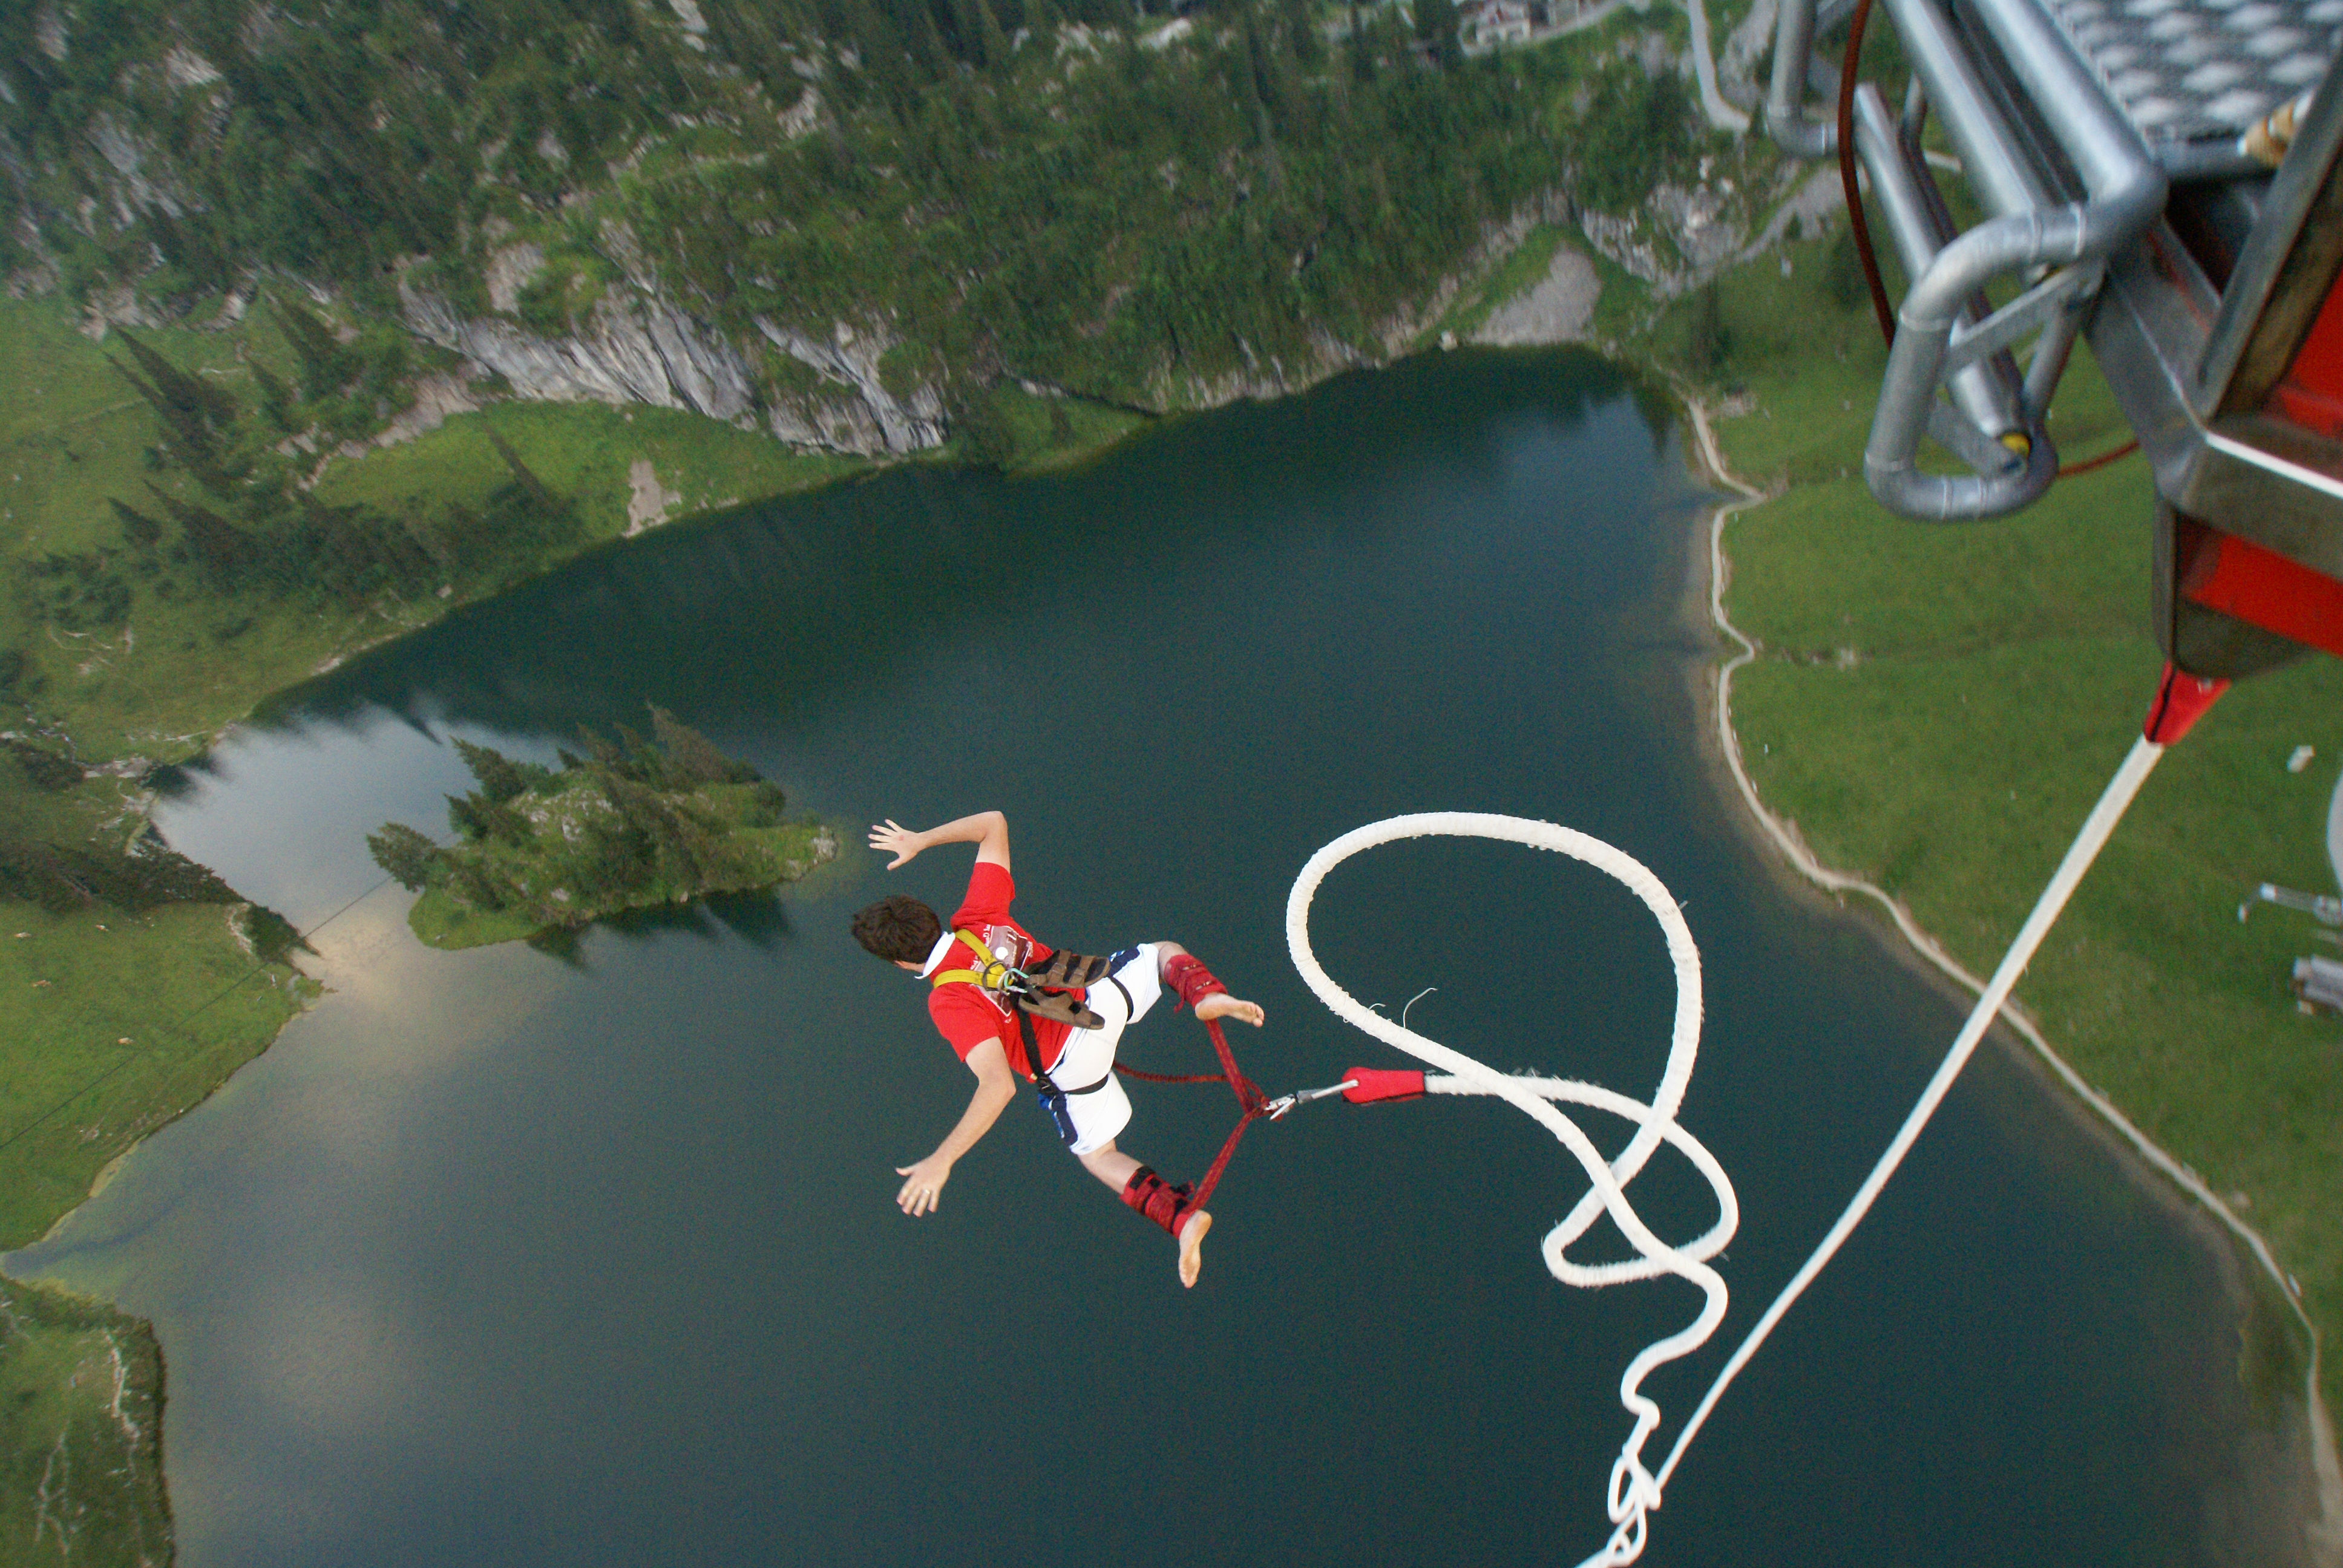 Bungee Jump Wallpaper And Background Image